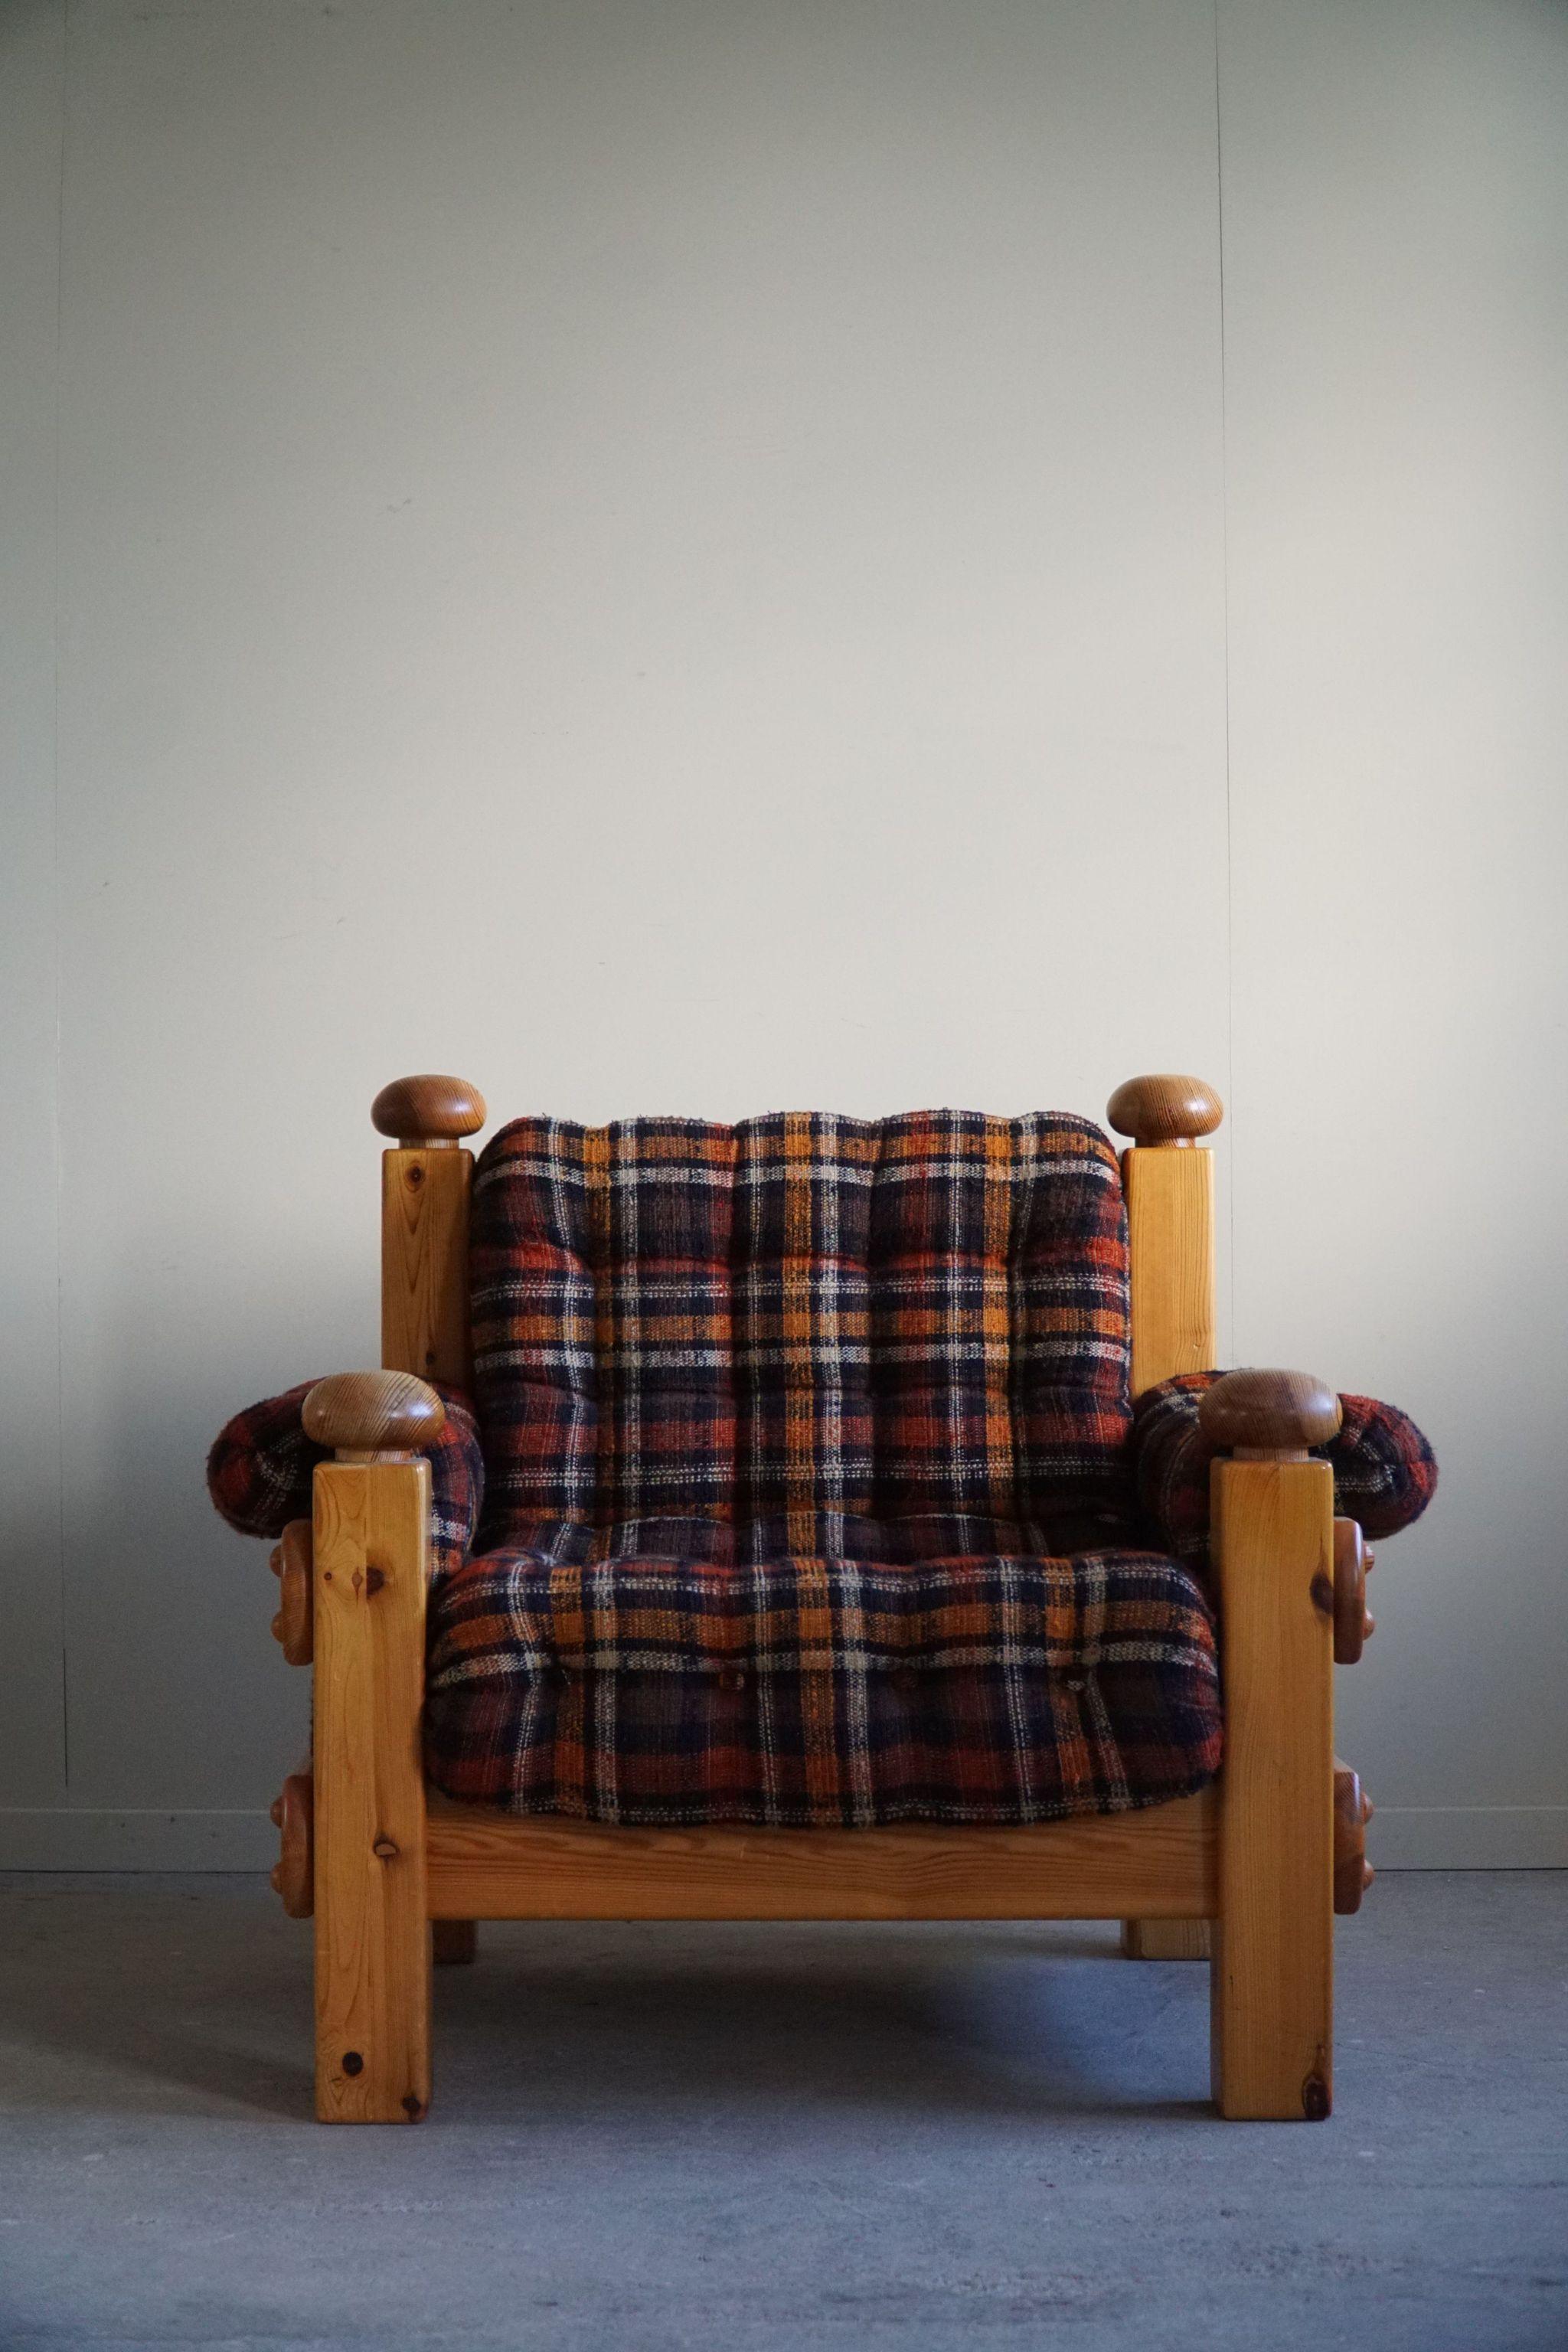 Brutalist Lounge Chair in Solid Pine, Swedish Modern, Made in the 1970s For Sale 9